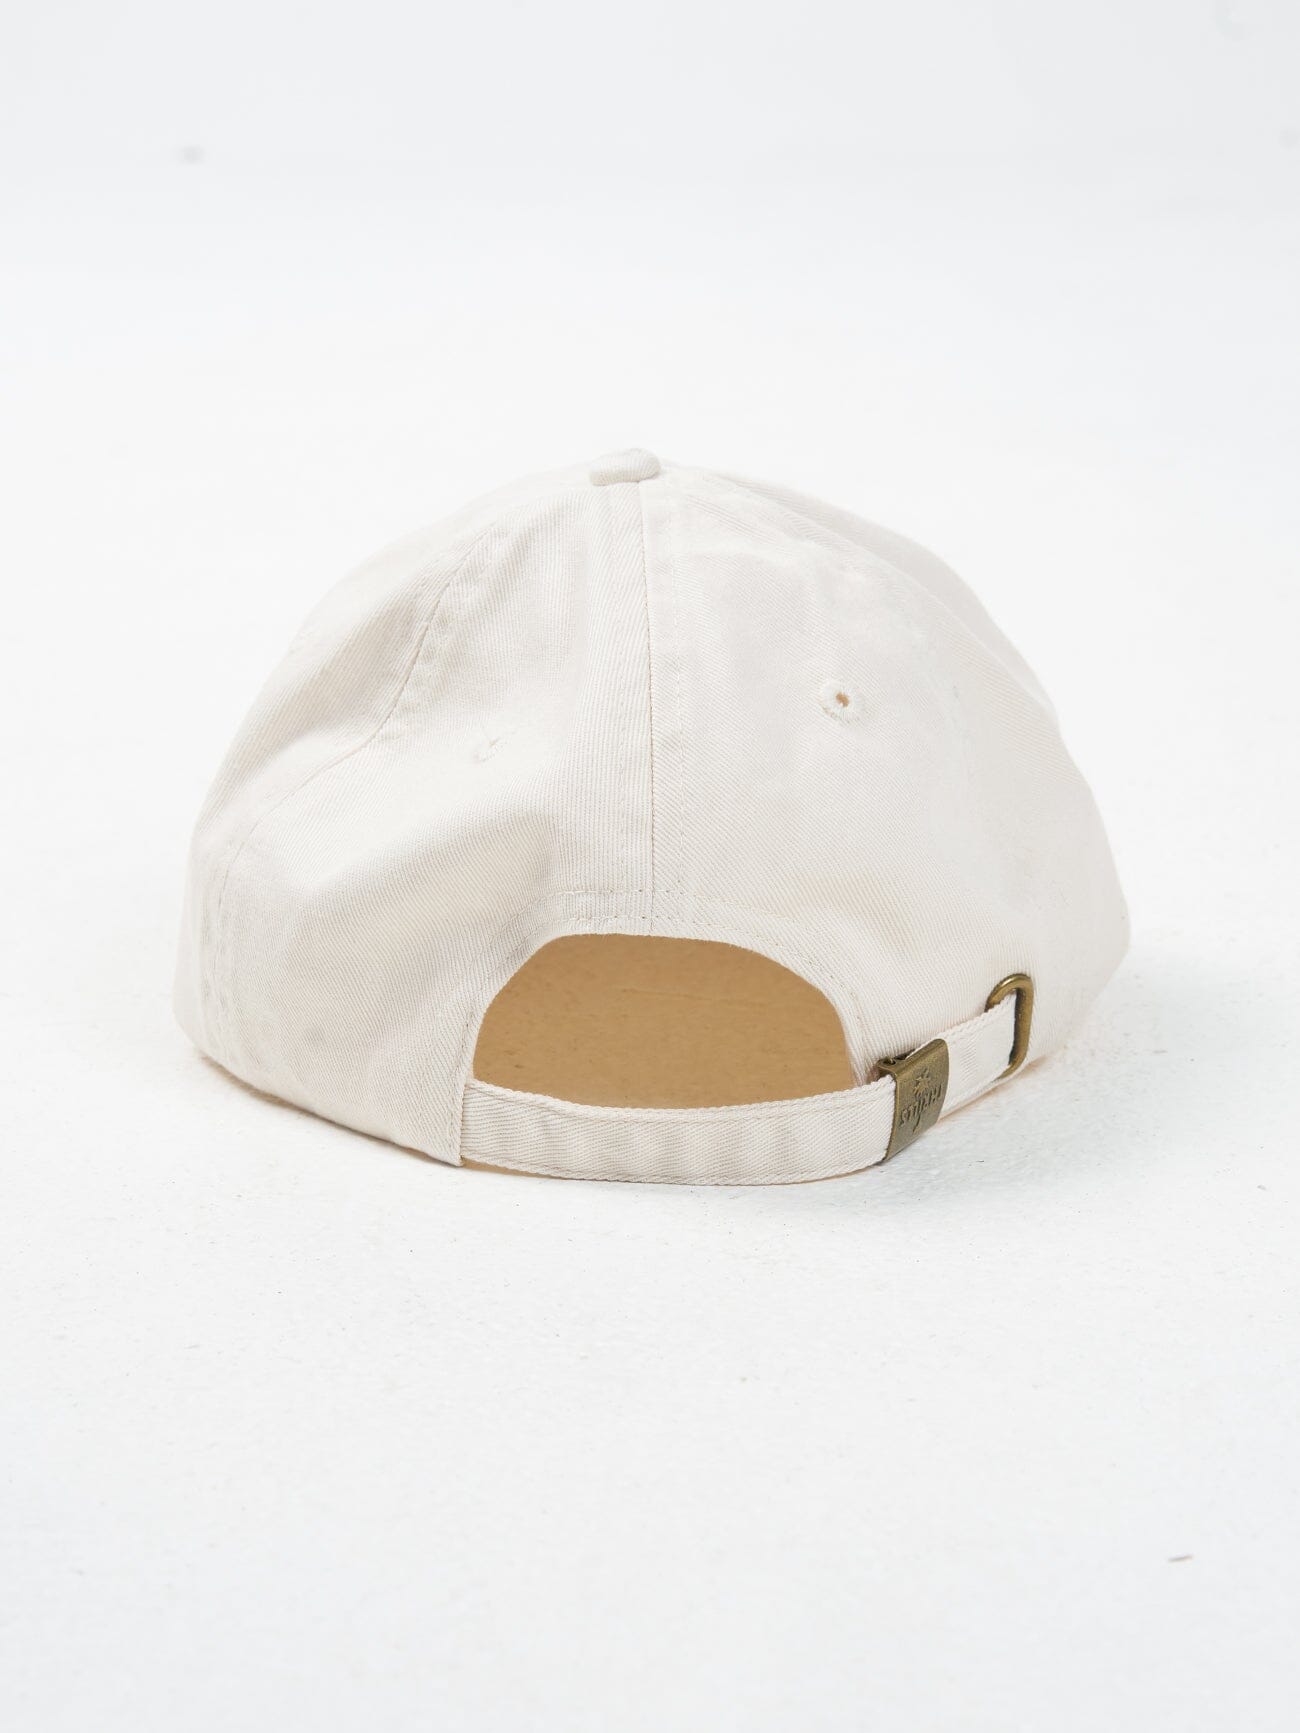 Natural Occurences 6 Panel Cap - Heritage White